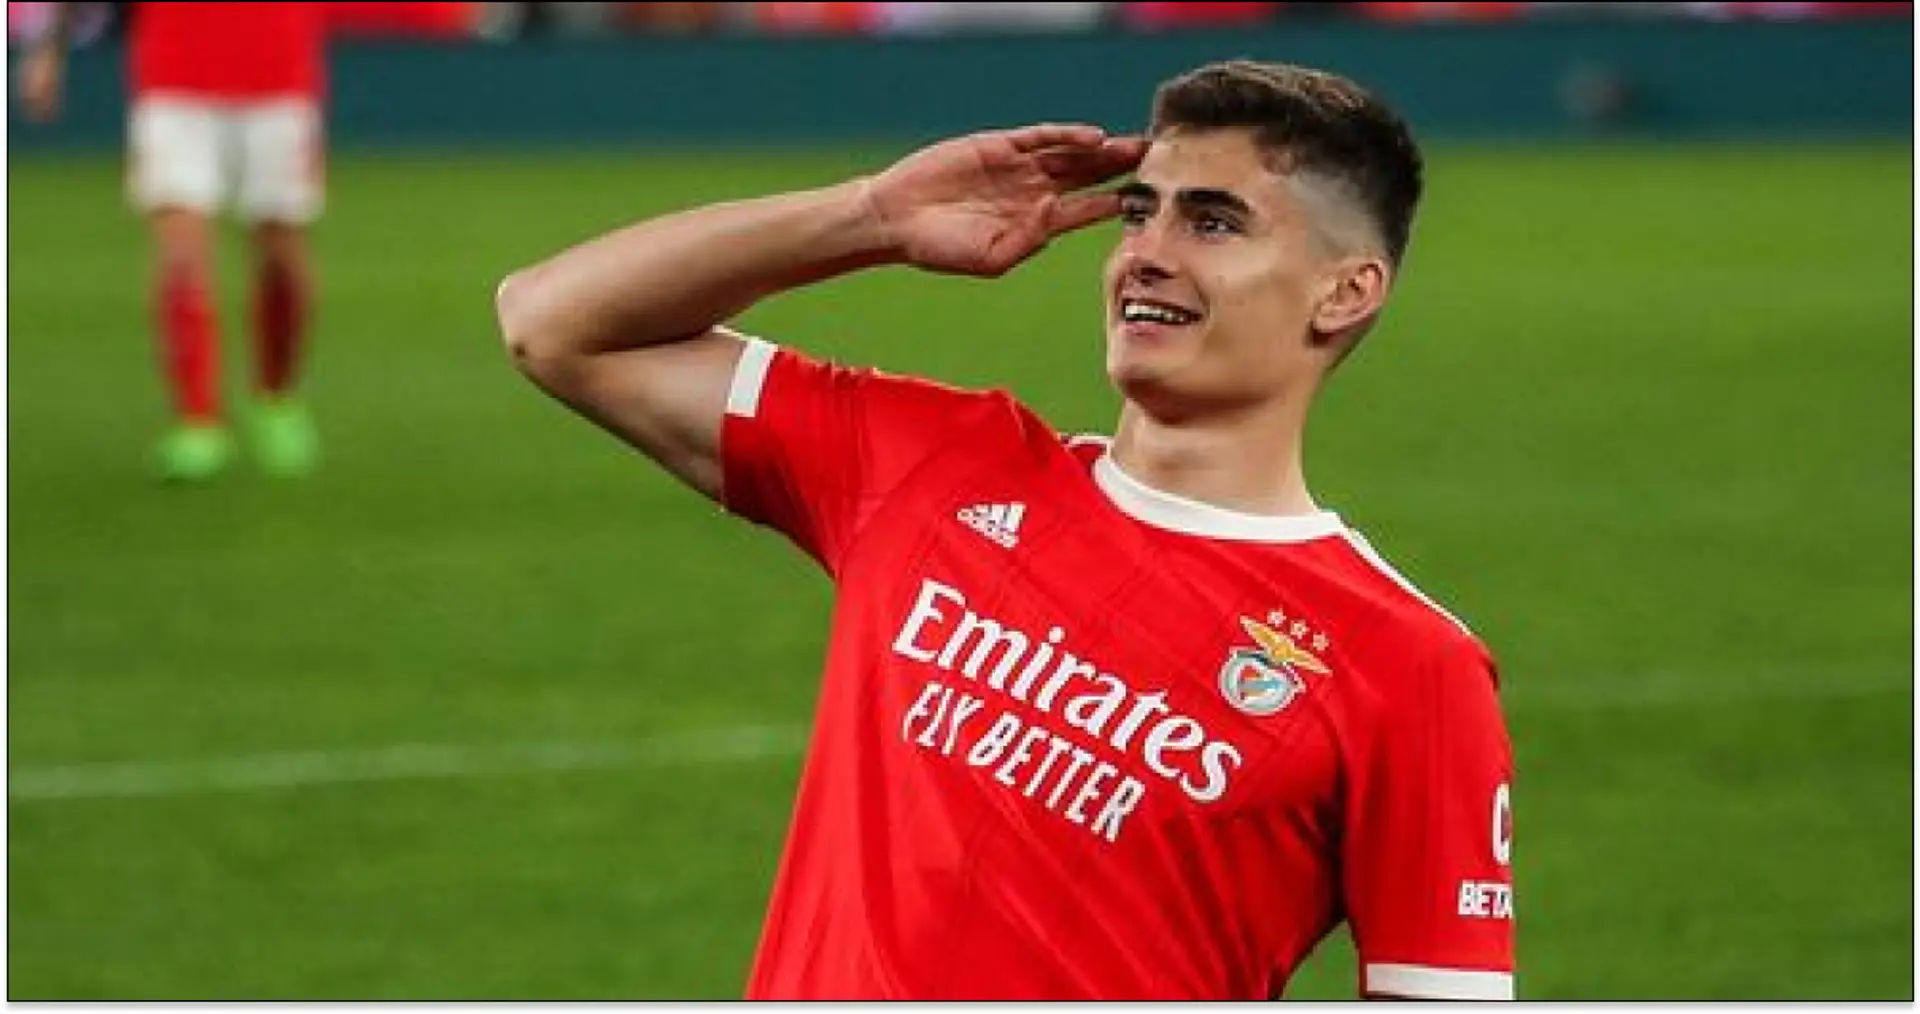 Man United 'sent scouts' to track Benfica centre-back with five goals in 44 matches — Romano